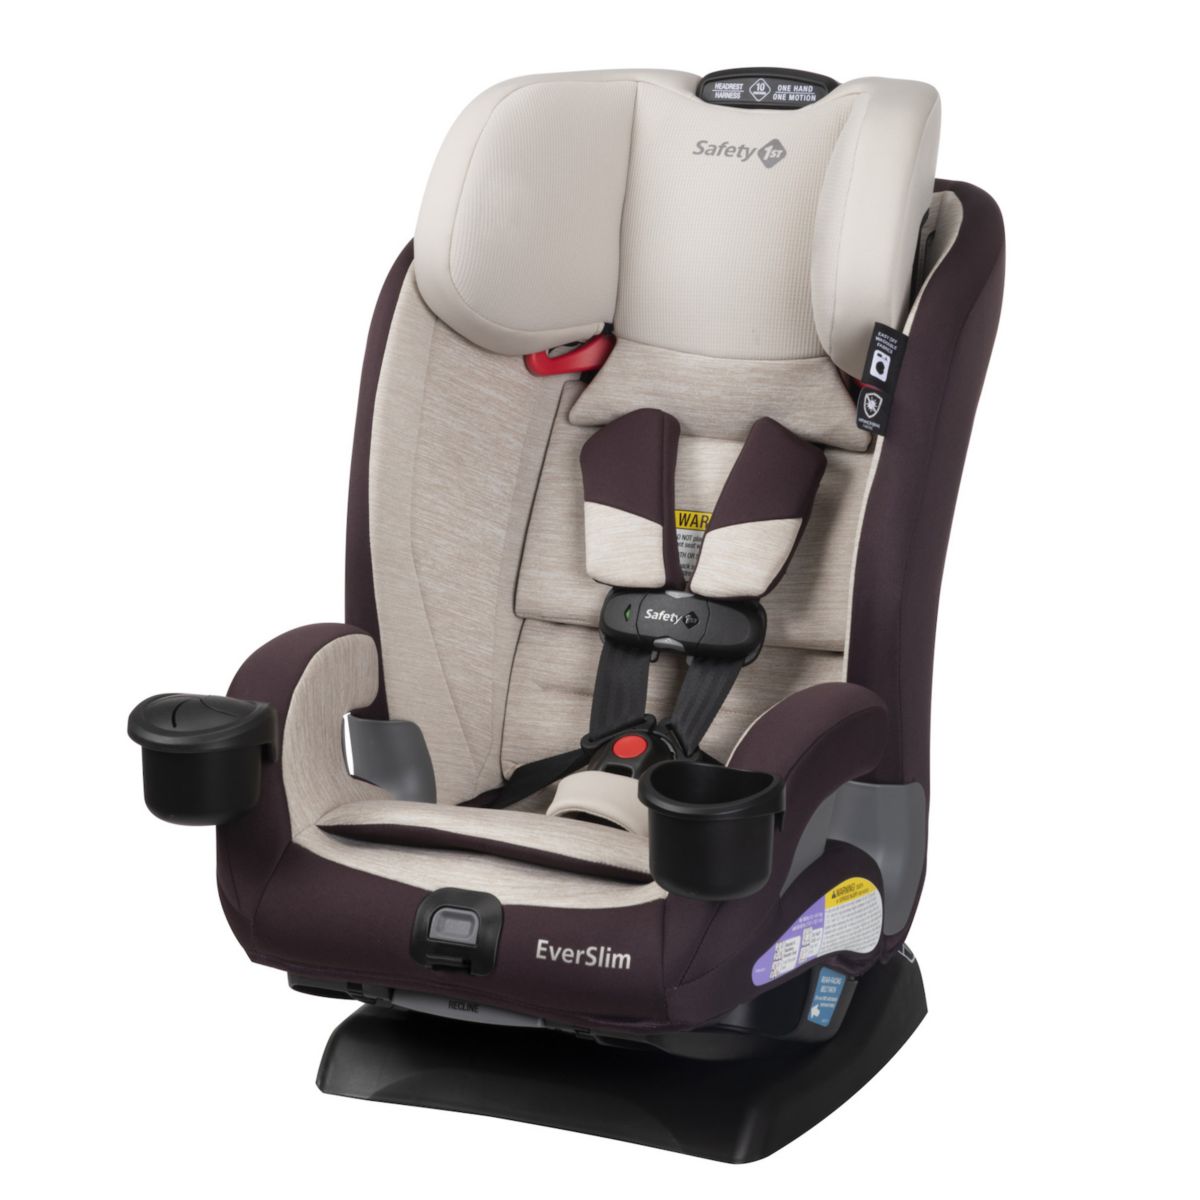 Safety 1st® Everslim DLX All-In-One Convertible Car Seat Safety 1st